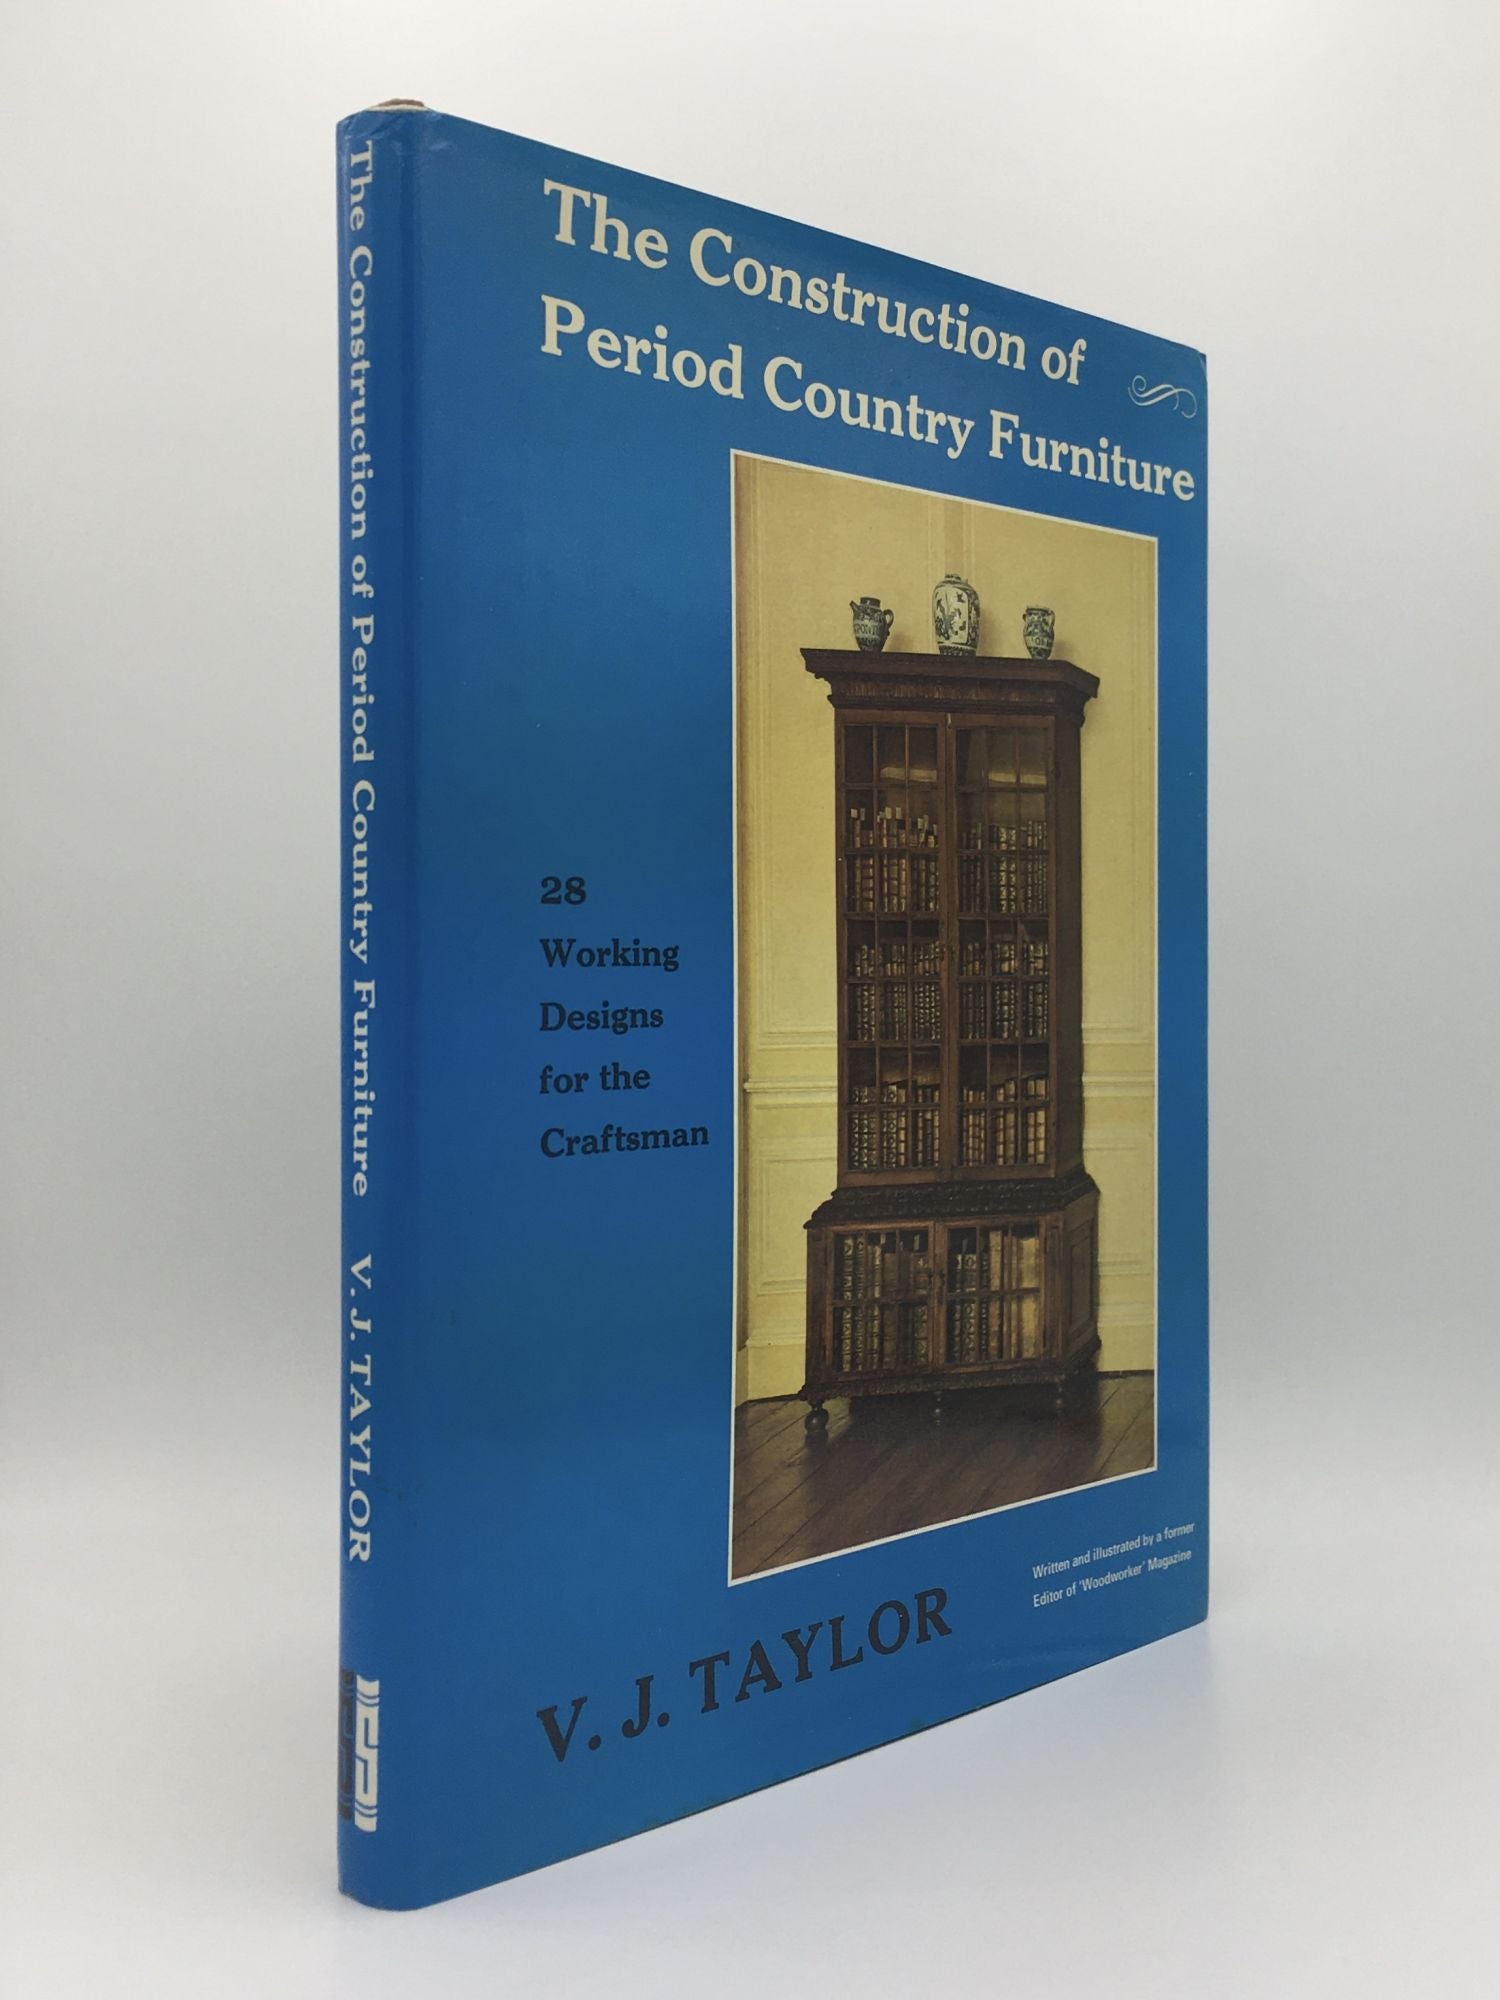 TAYLOR V. J. - The Constrction of Period Country Furniture